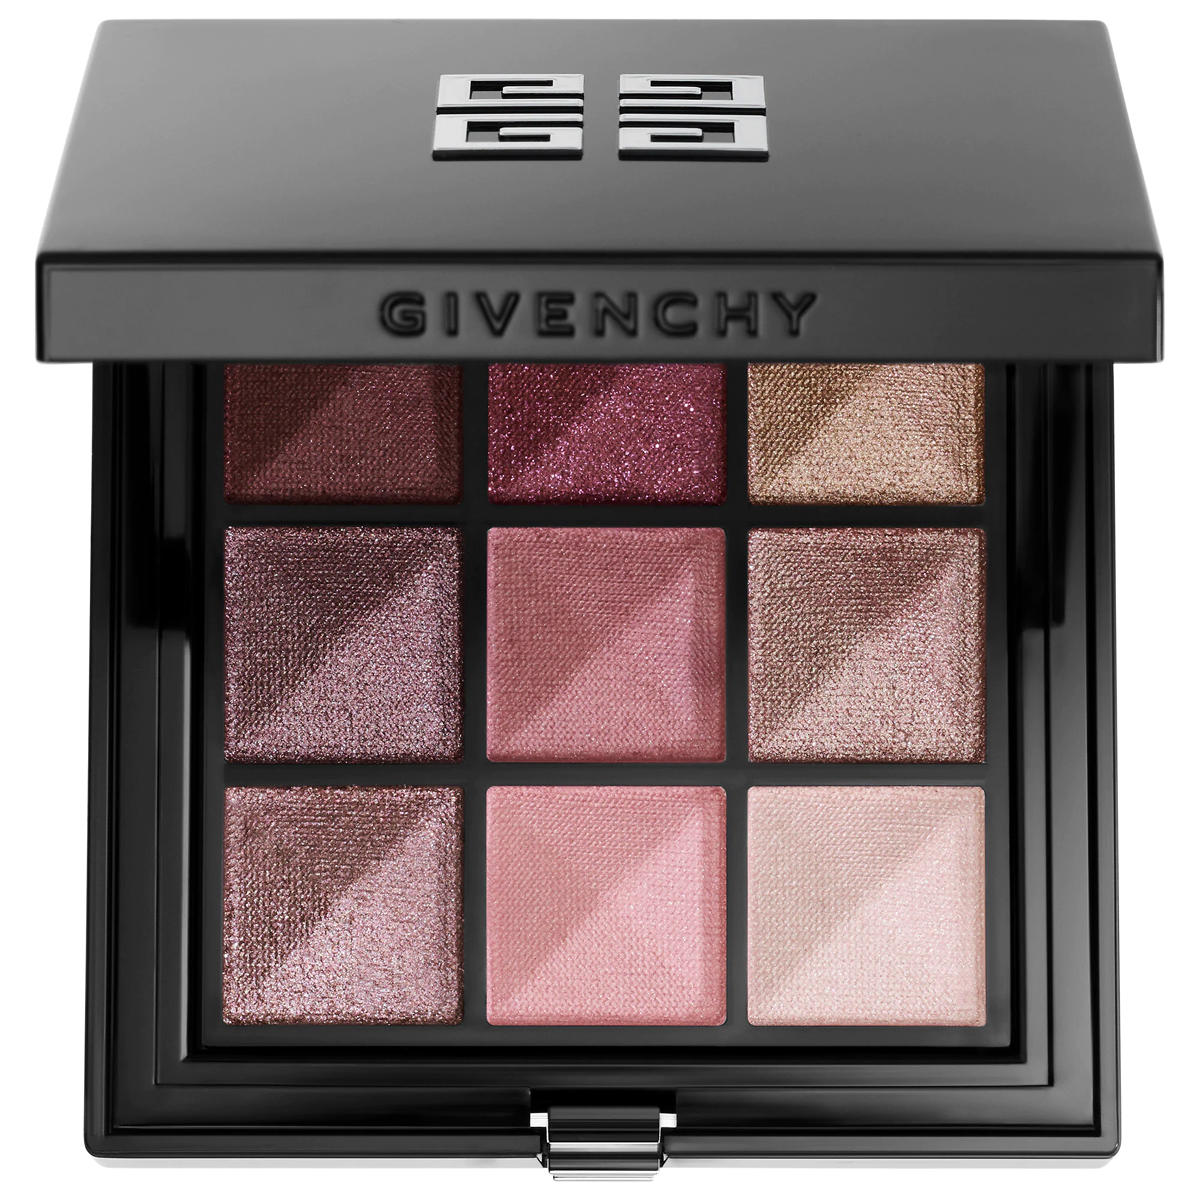 Givenchy Le Prismissime Eyeshadow Palette Essence Of Browns 02